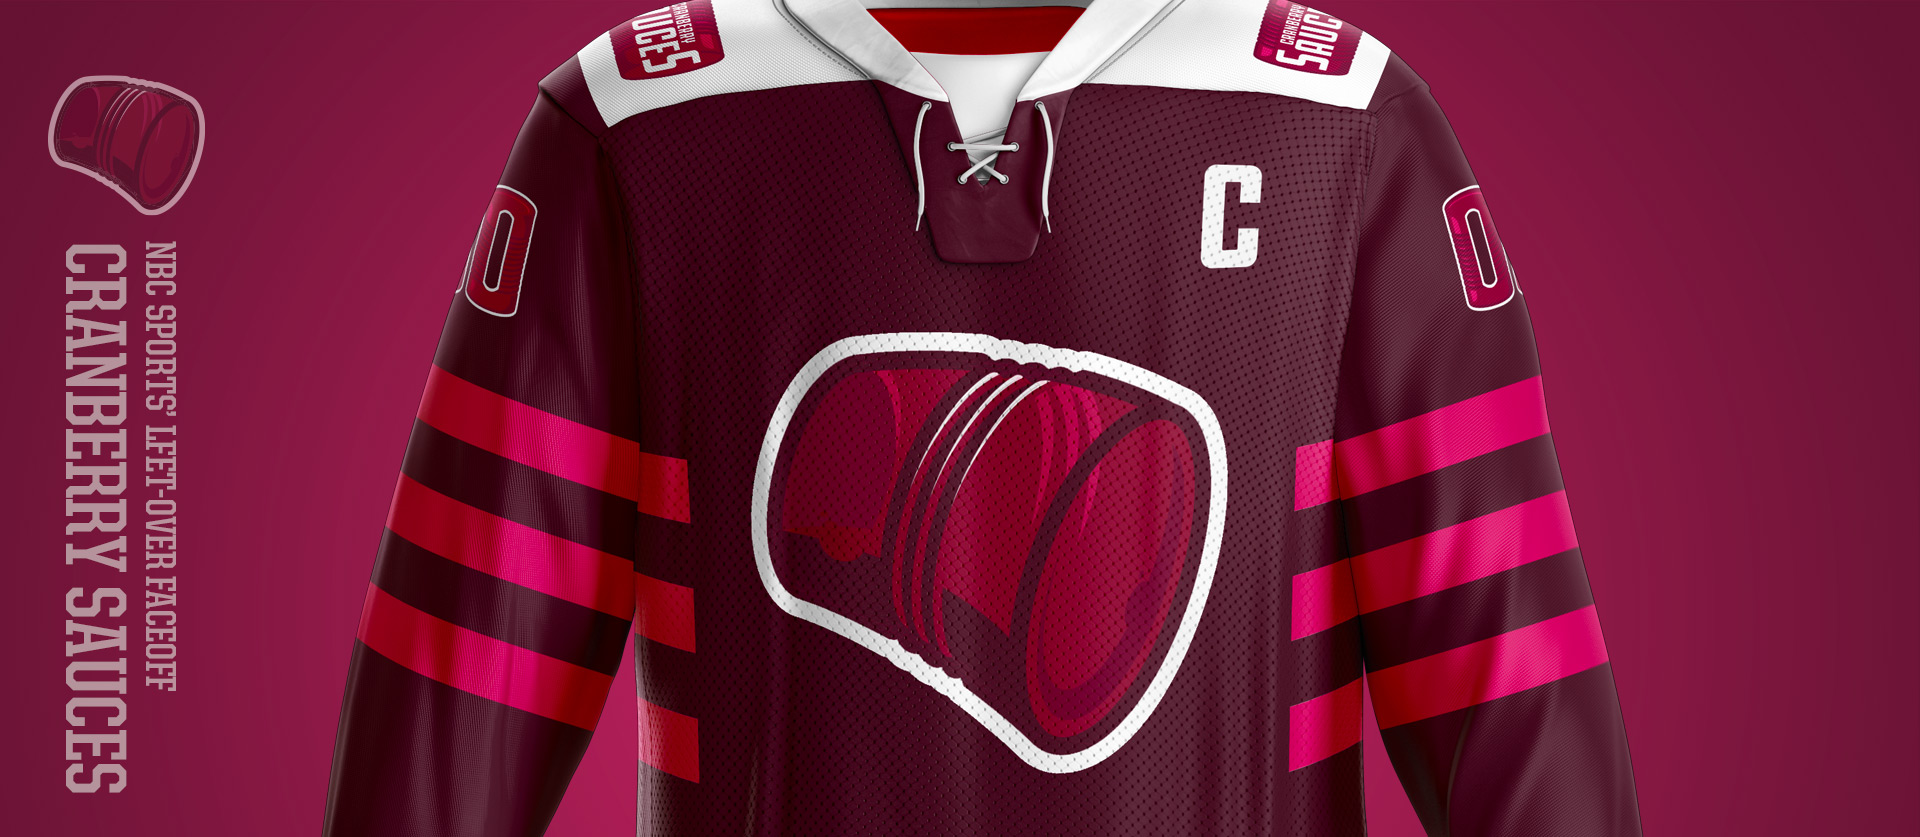 Cranberry Sauces Back - Football Uniform Design for NBC Sports Thanksgiving Second Feast Face-off